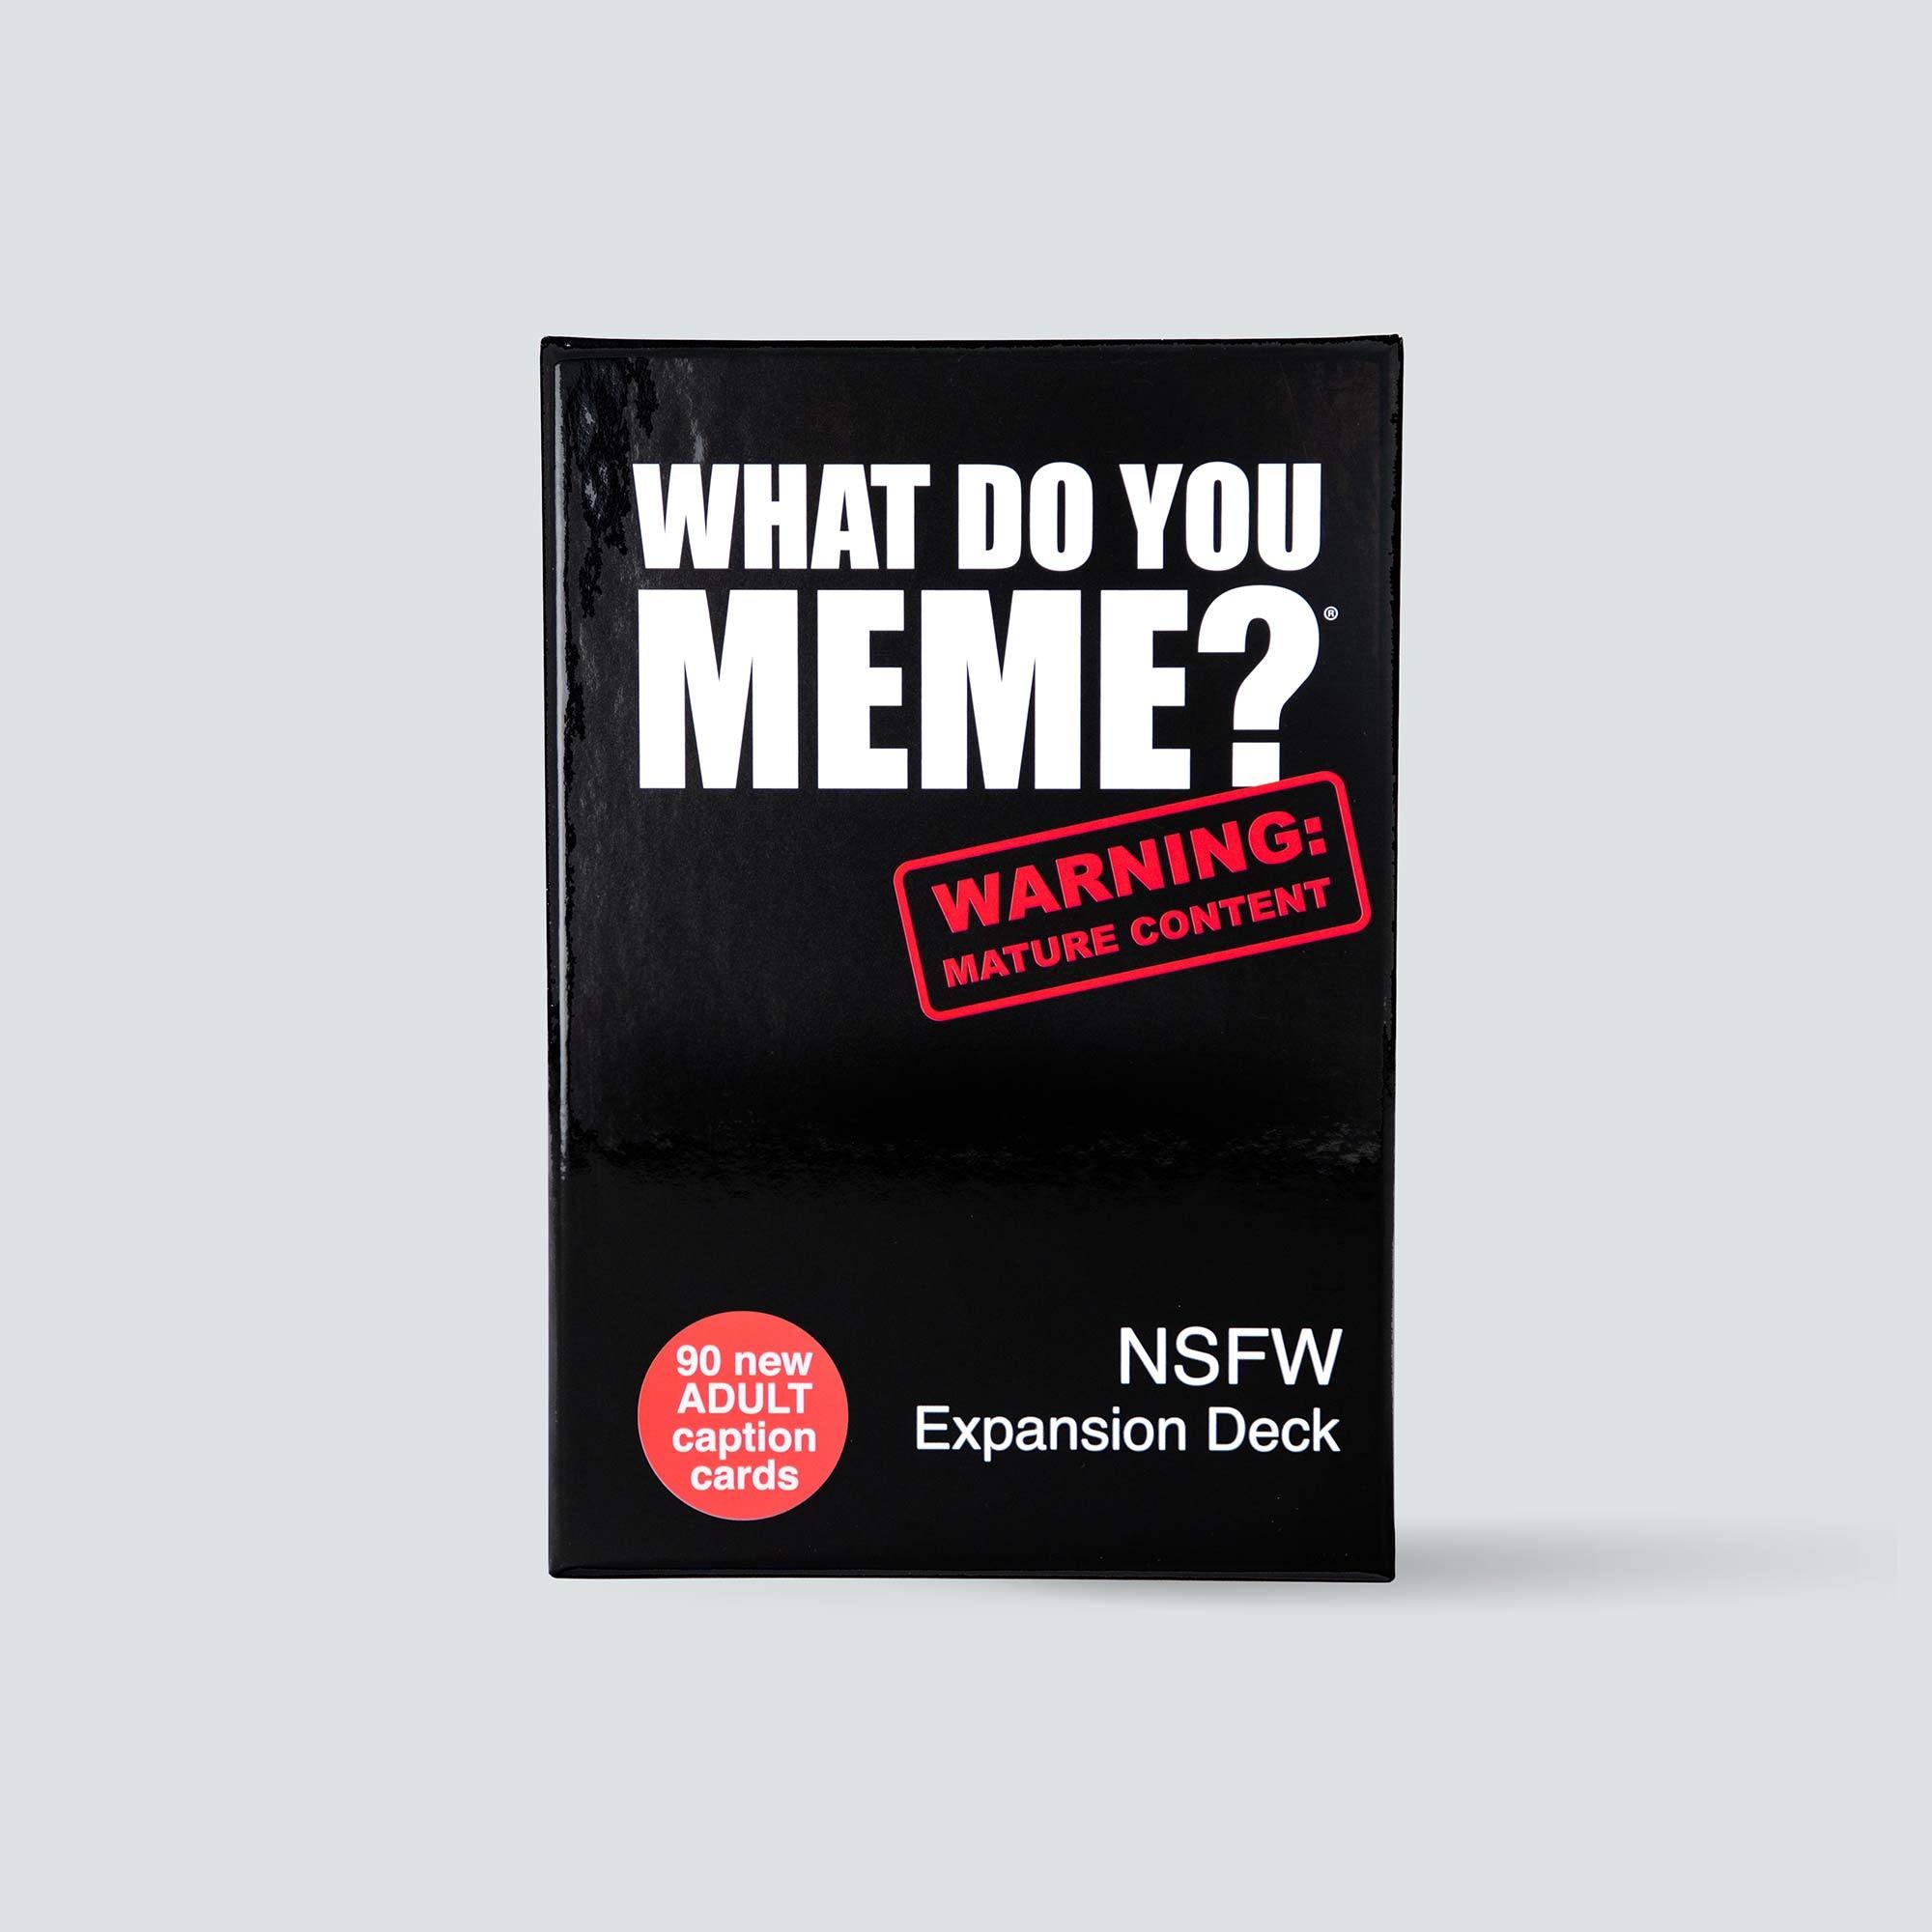 nsfw-expansion-pack-game-box-and-game-play-04-what-do-you-meme-by-relatable